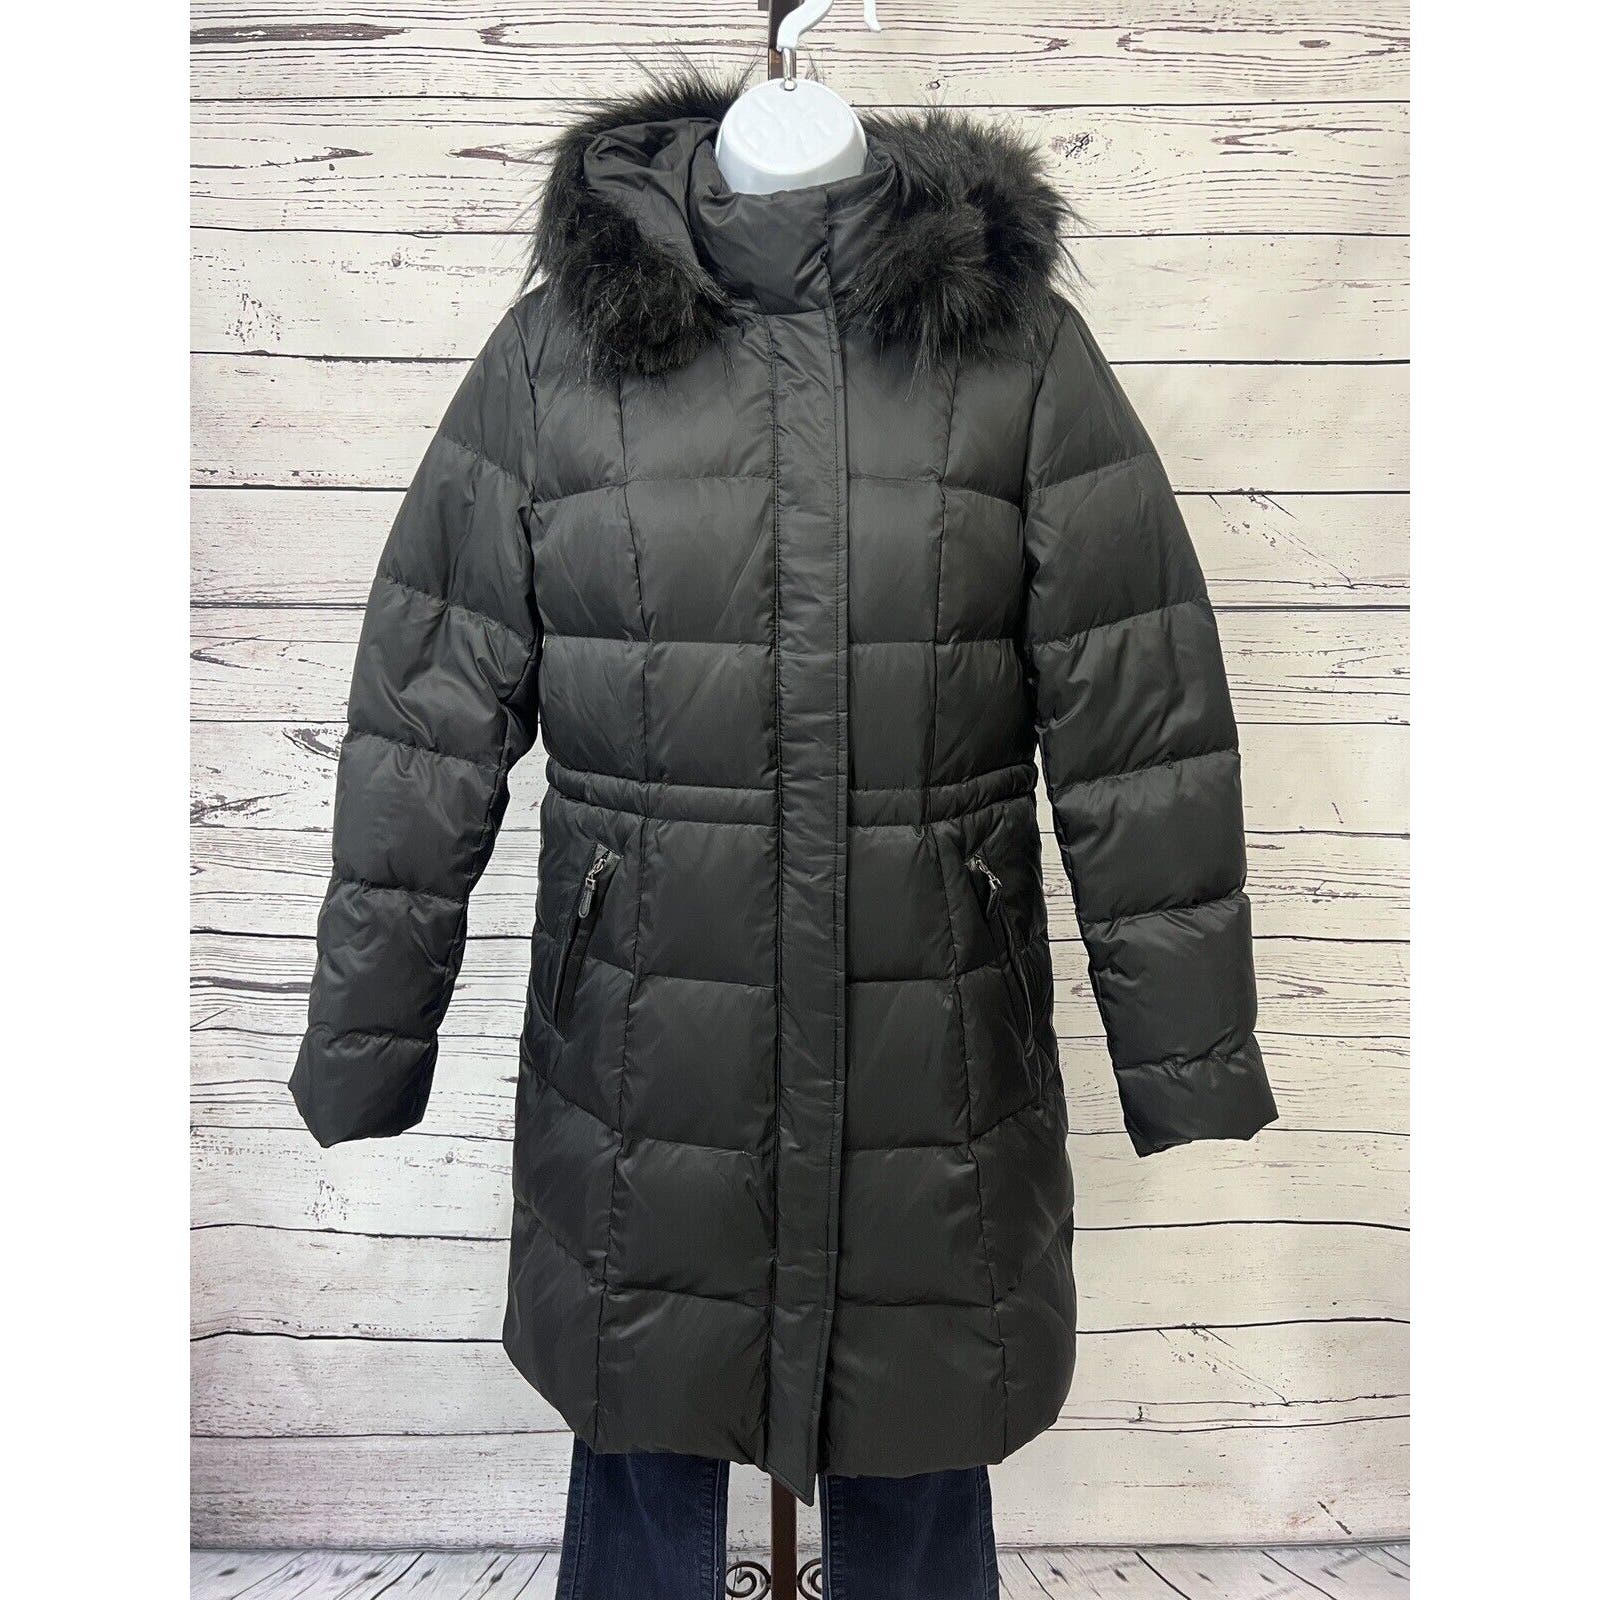 TALBOTS Long Down Puffer Coat Women’s Small Fur Lined Removable Hood Black